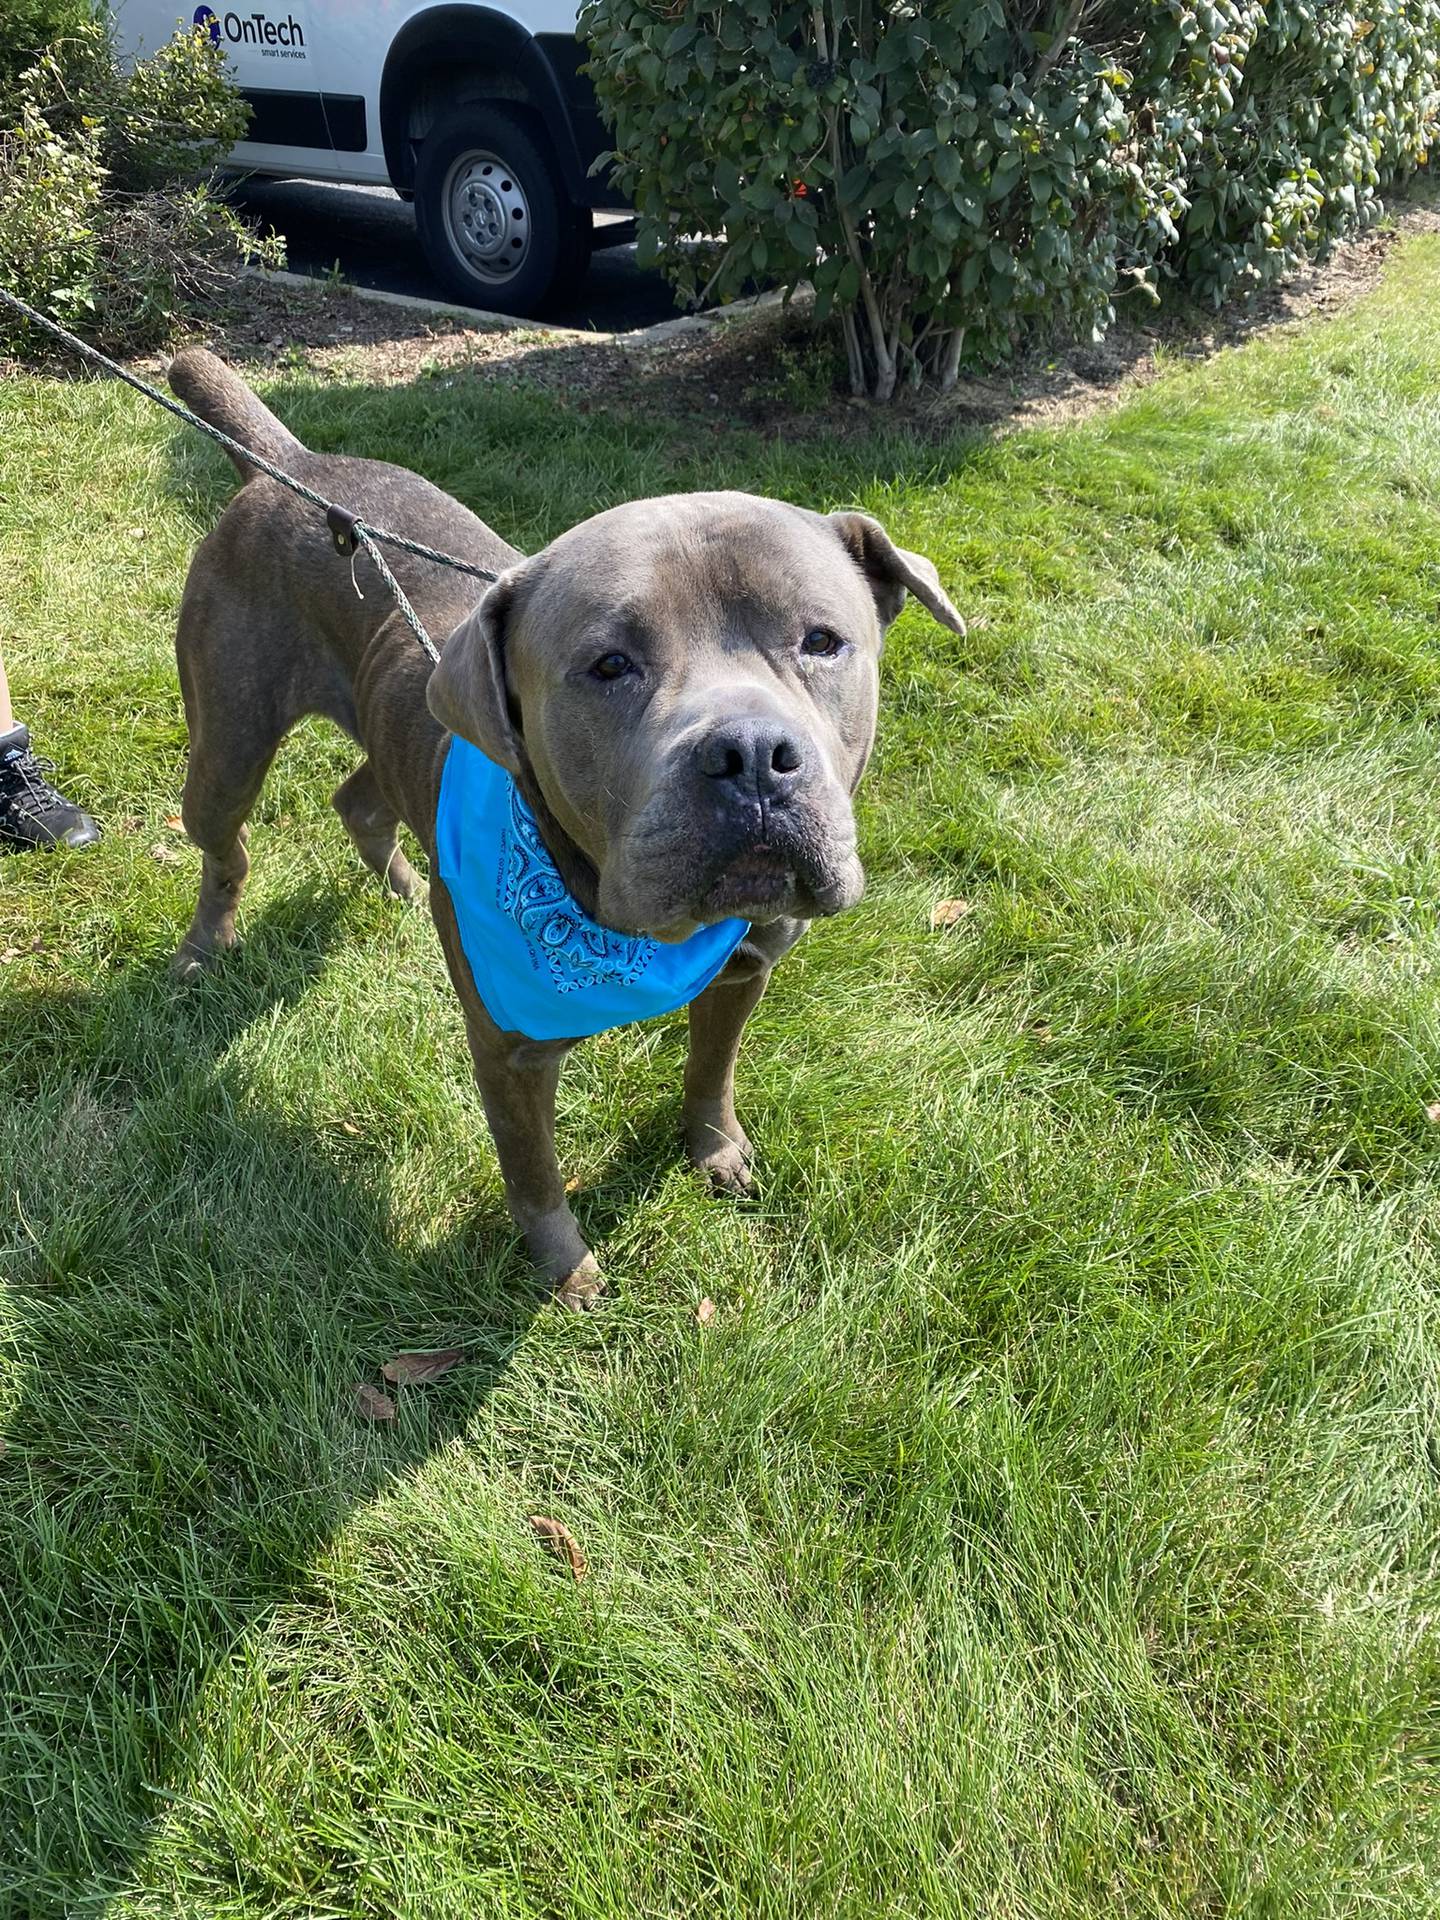 Jack is a 6-year-old, 135-pound mastiff/cane corso mix that lost his owner and needs a new home. He likes walks and lounging in his dog bed. He loves people and children but must be the only pet in a home. To meet Jack, email Dogadoption@nawsus.org. Visit nawsus.org.